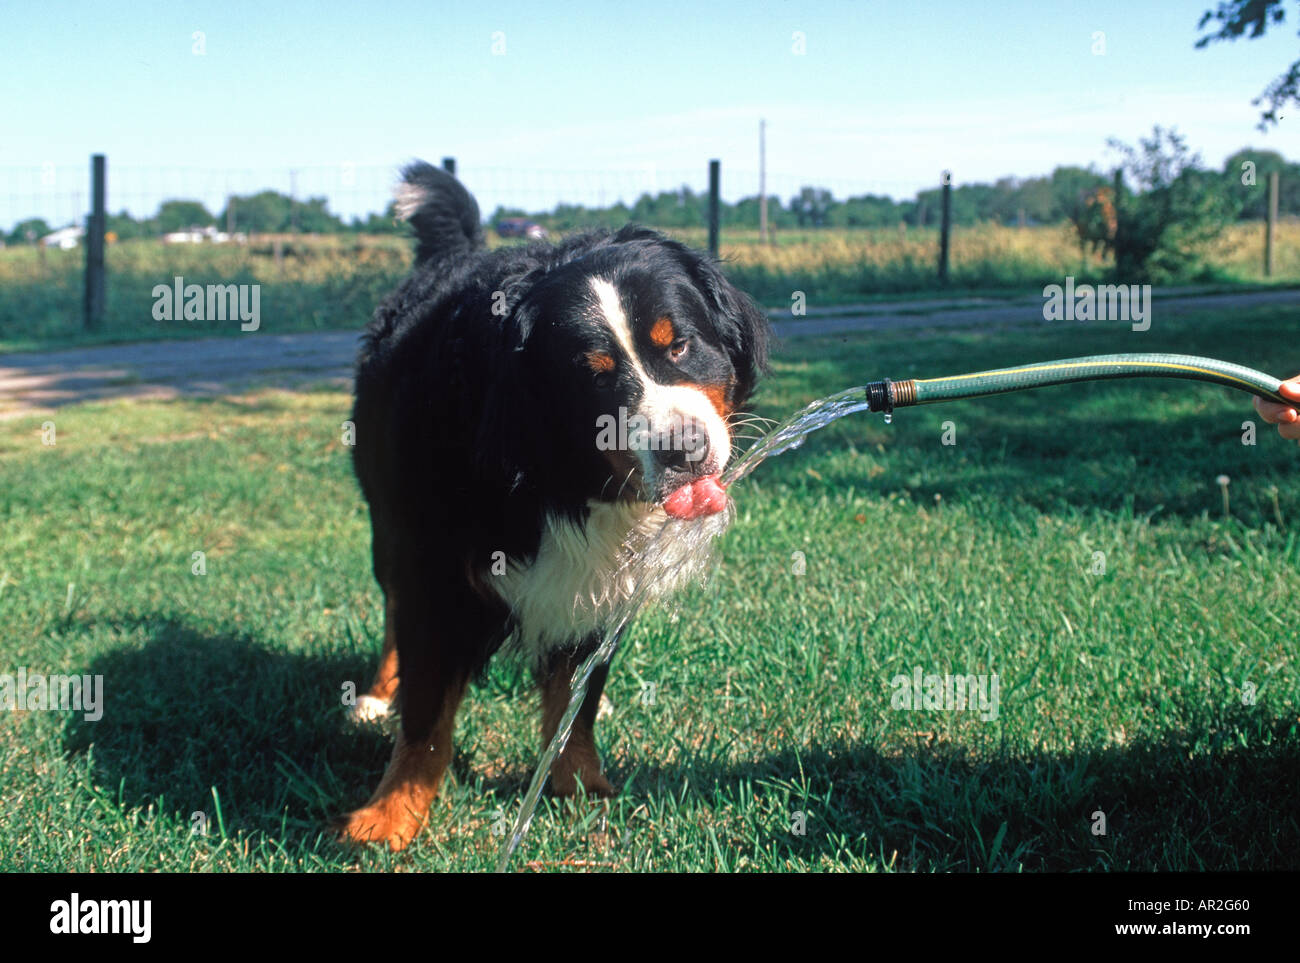 Male Bernese Mountain Dog Berner Sennen drinking water from a hose during a warm summer day in rural Nebraska Stock Photo